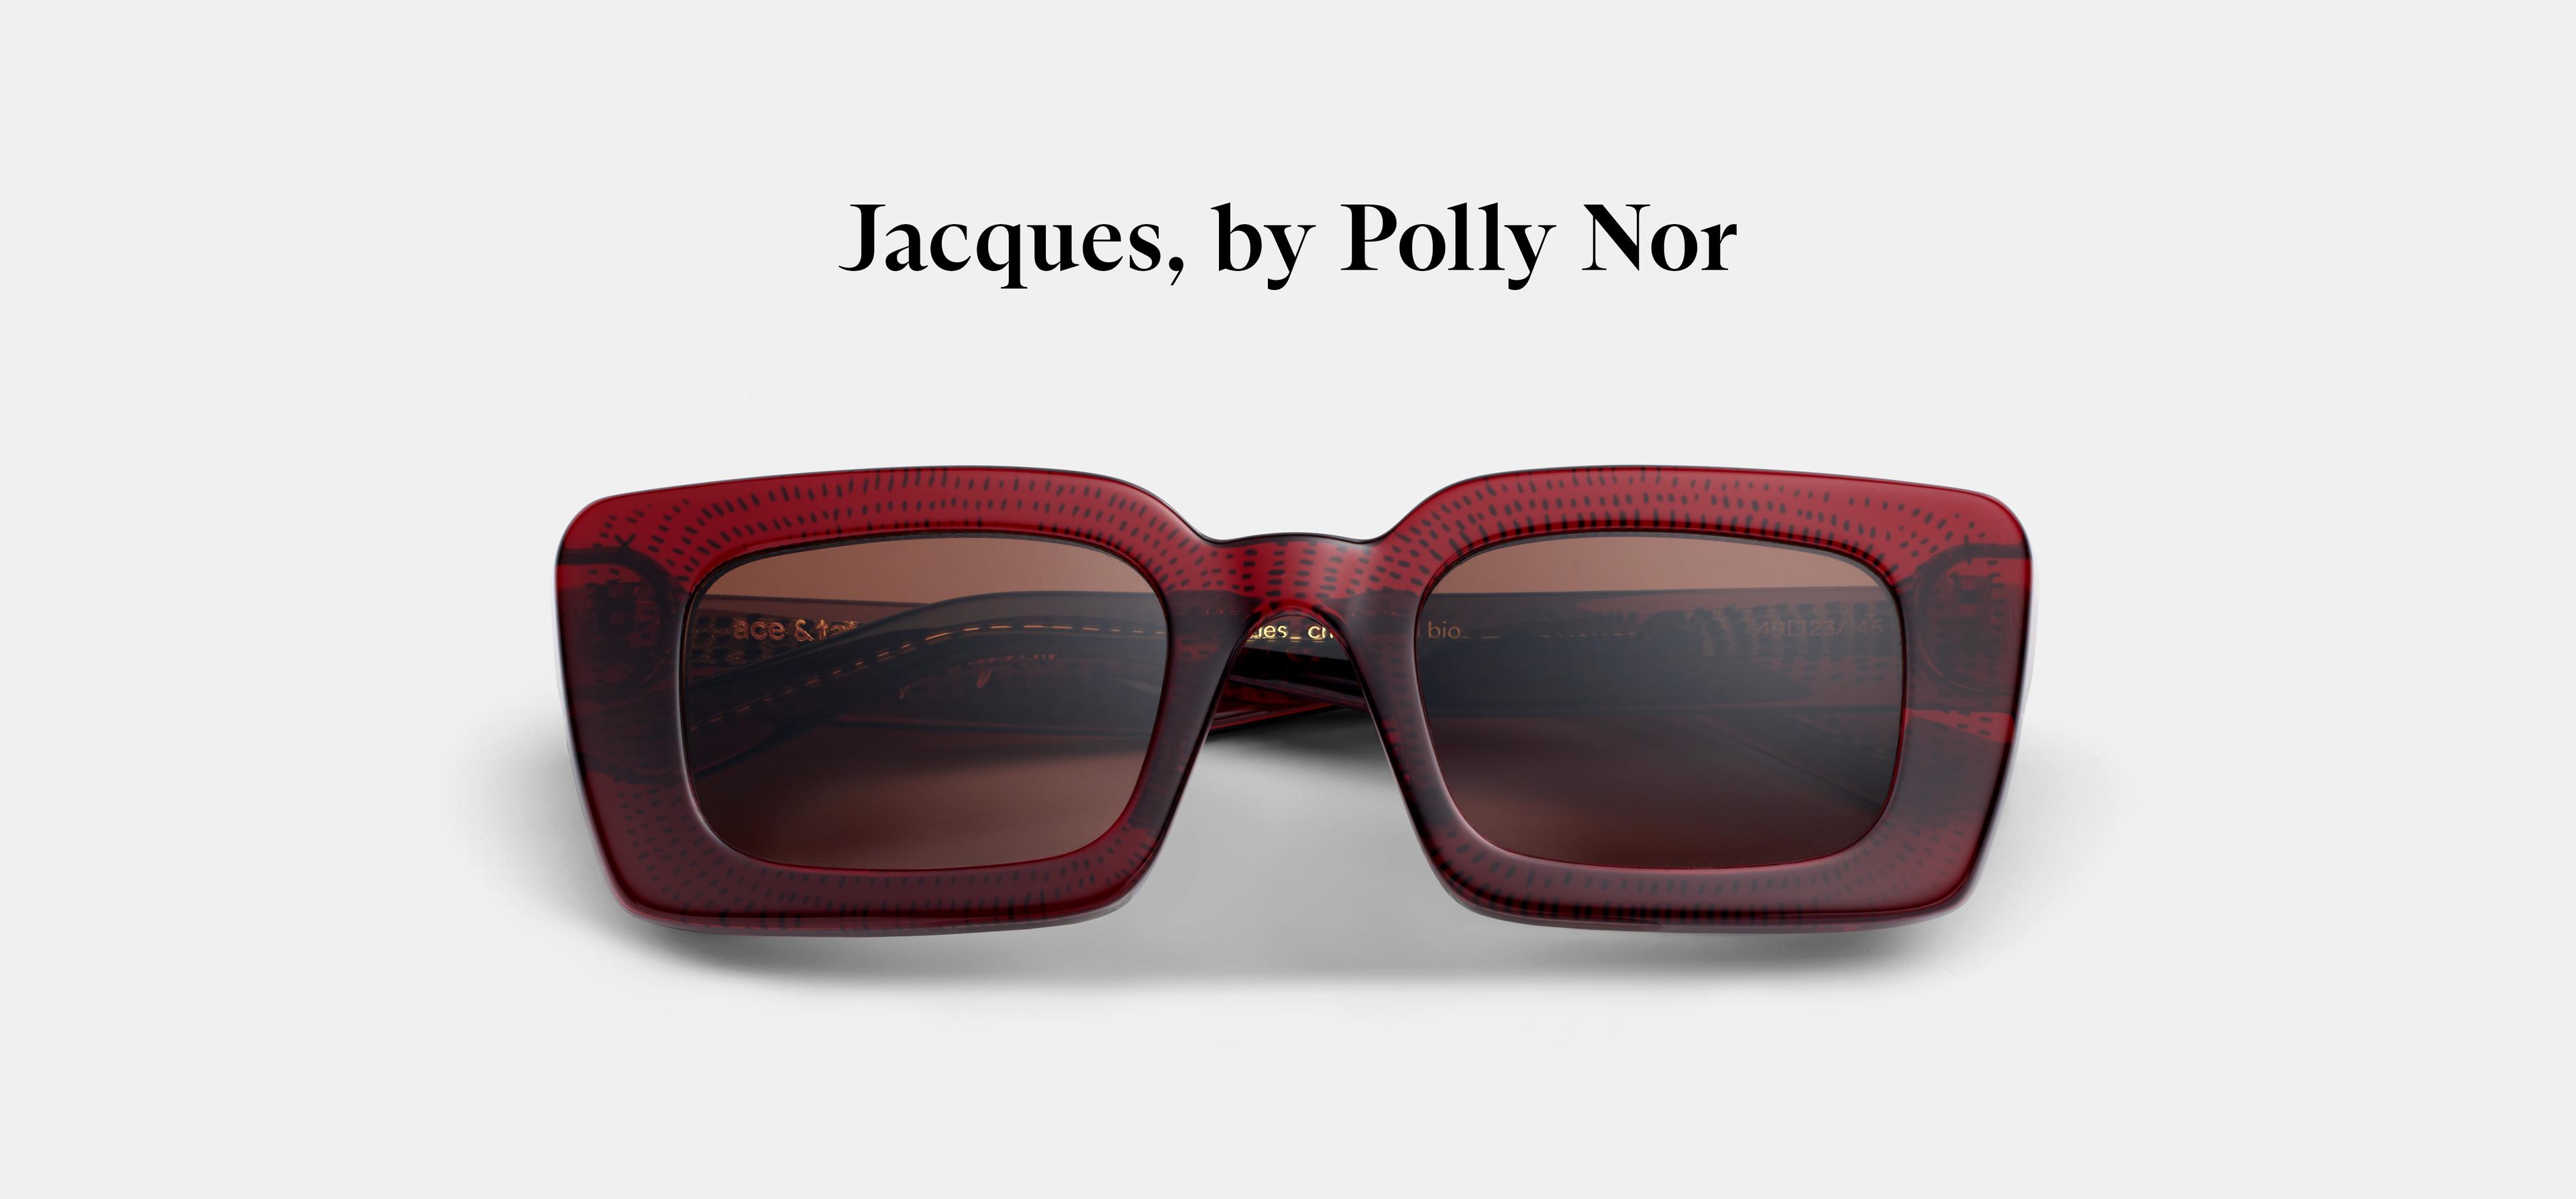 jacques-polly-nor-cherry-sun flat 1